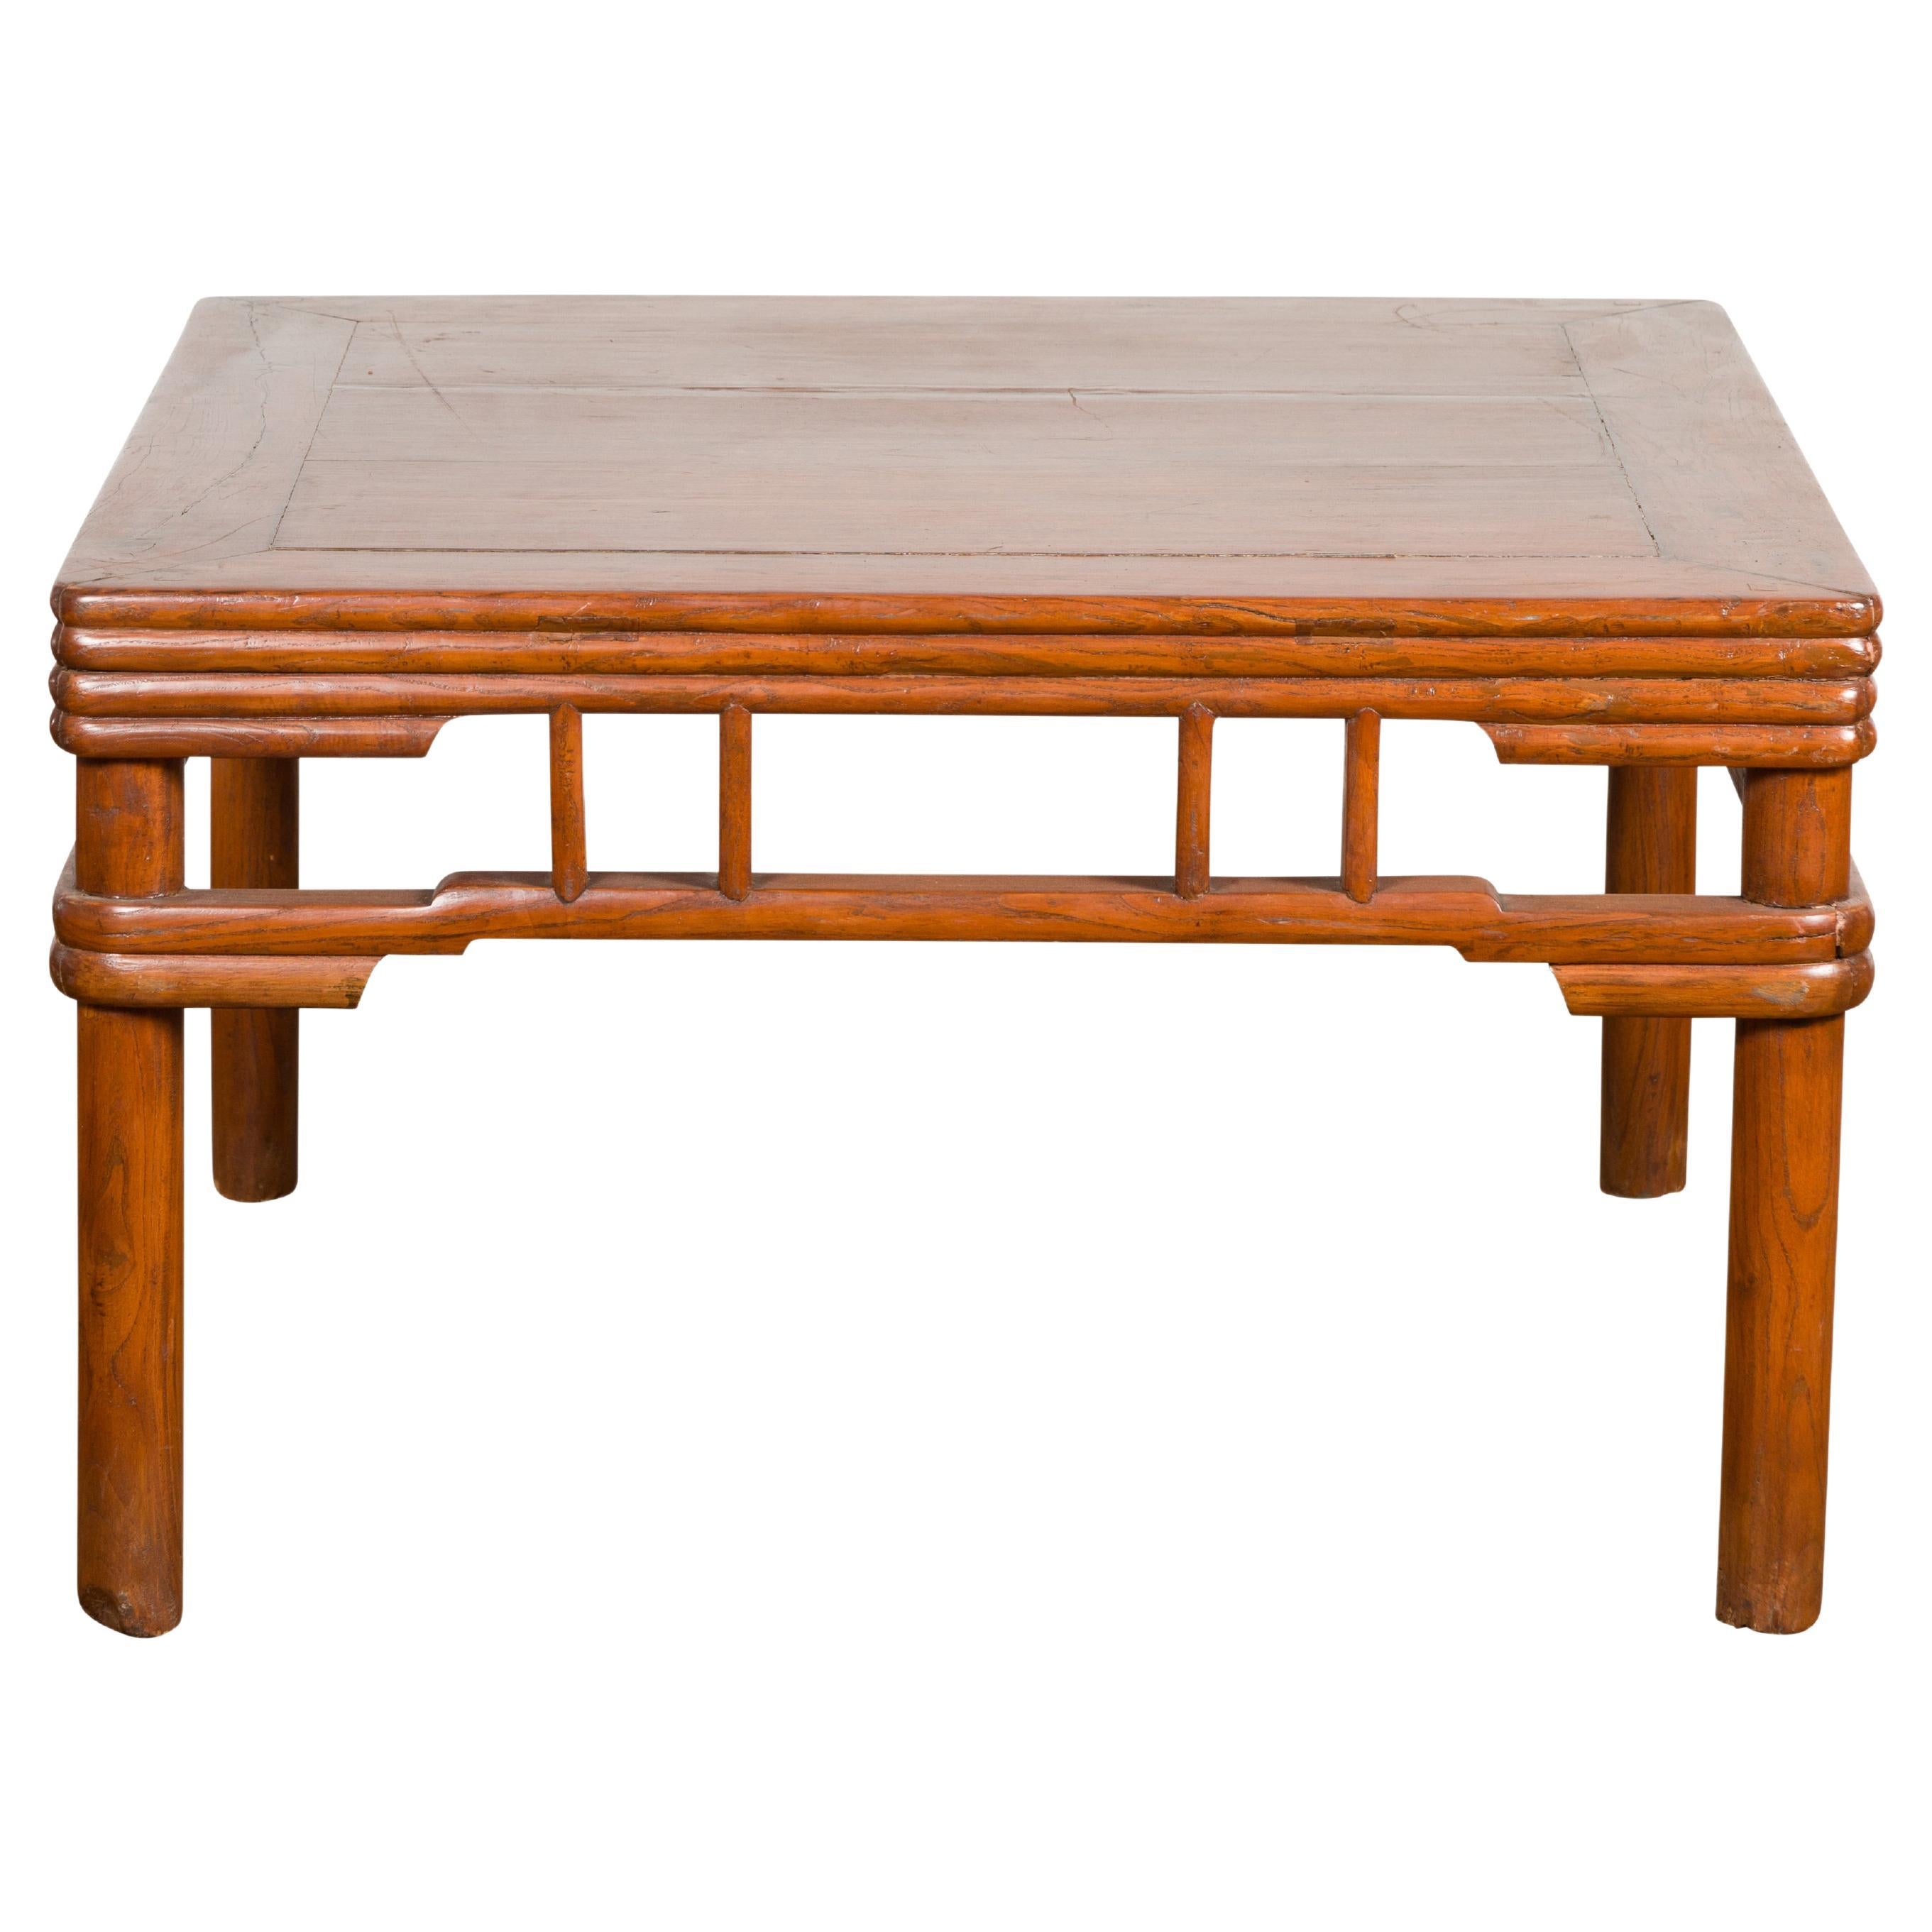 1900s Antique Square Elmwood Coffee Table For Sale